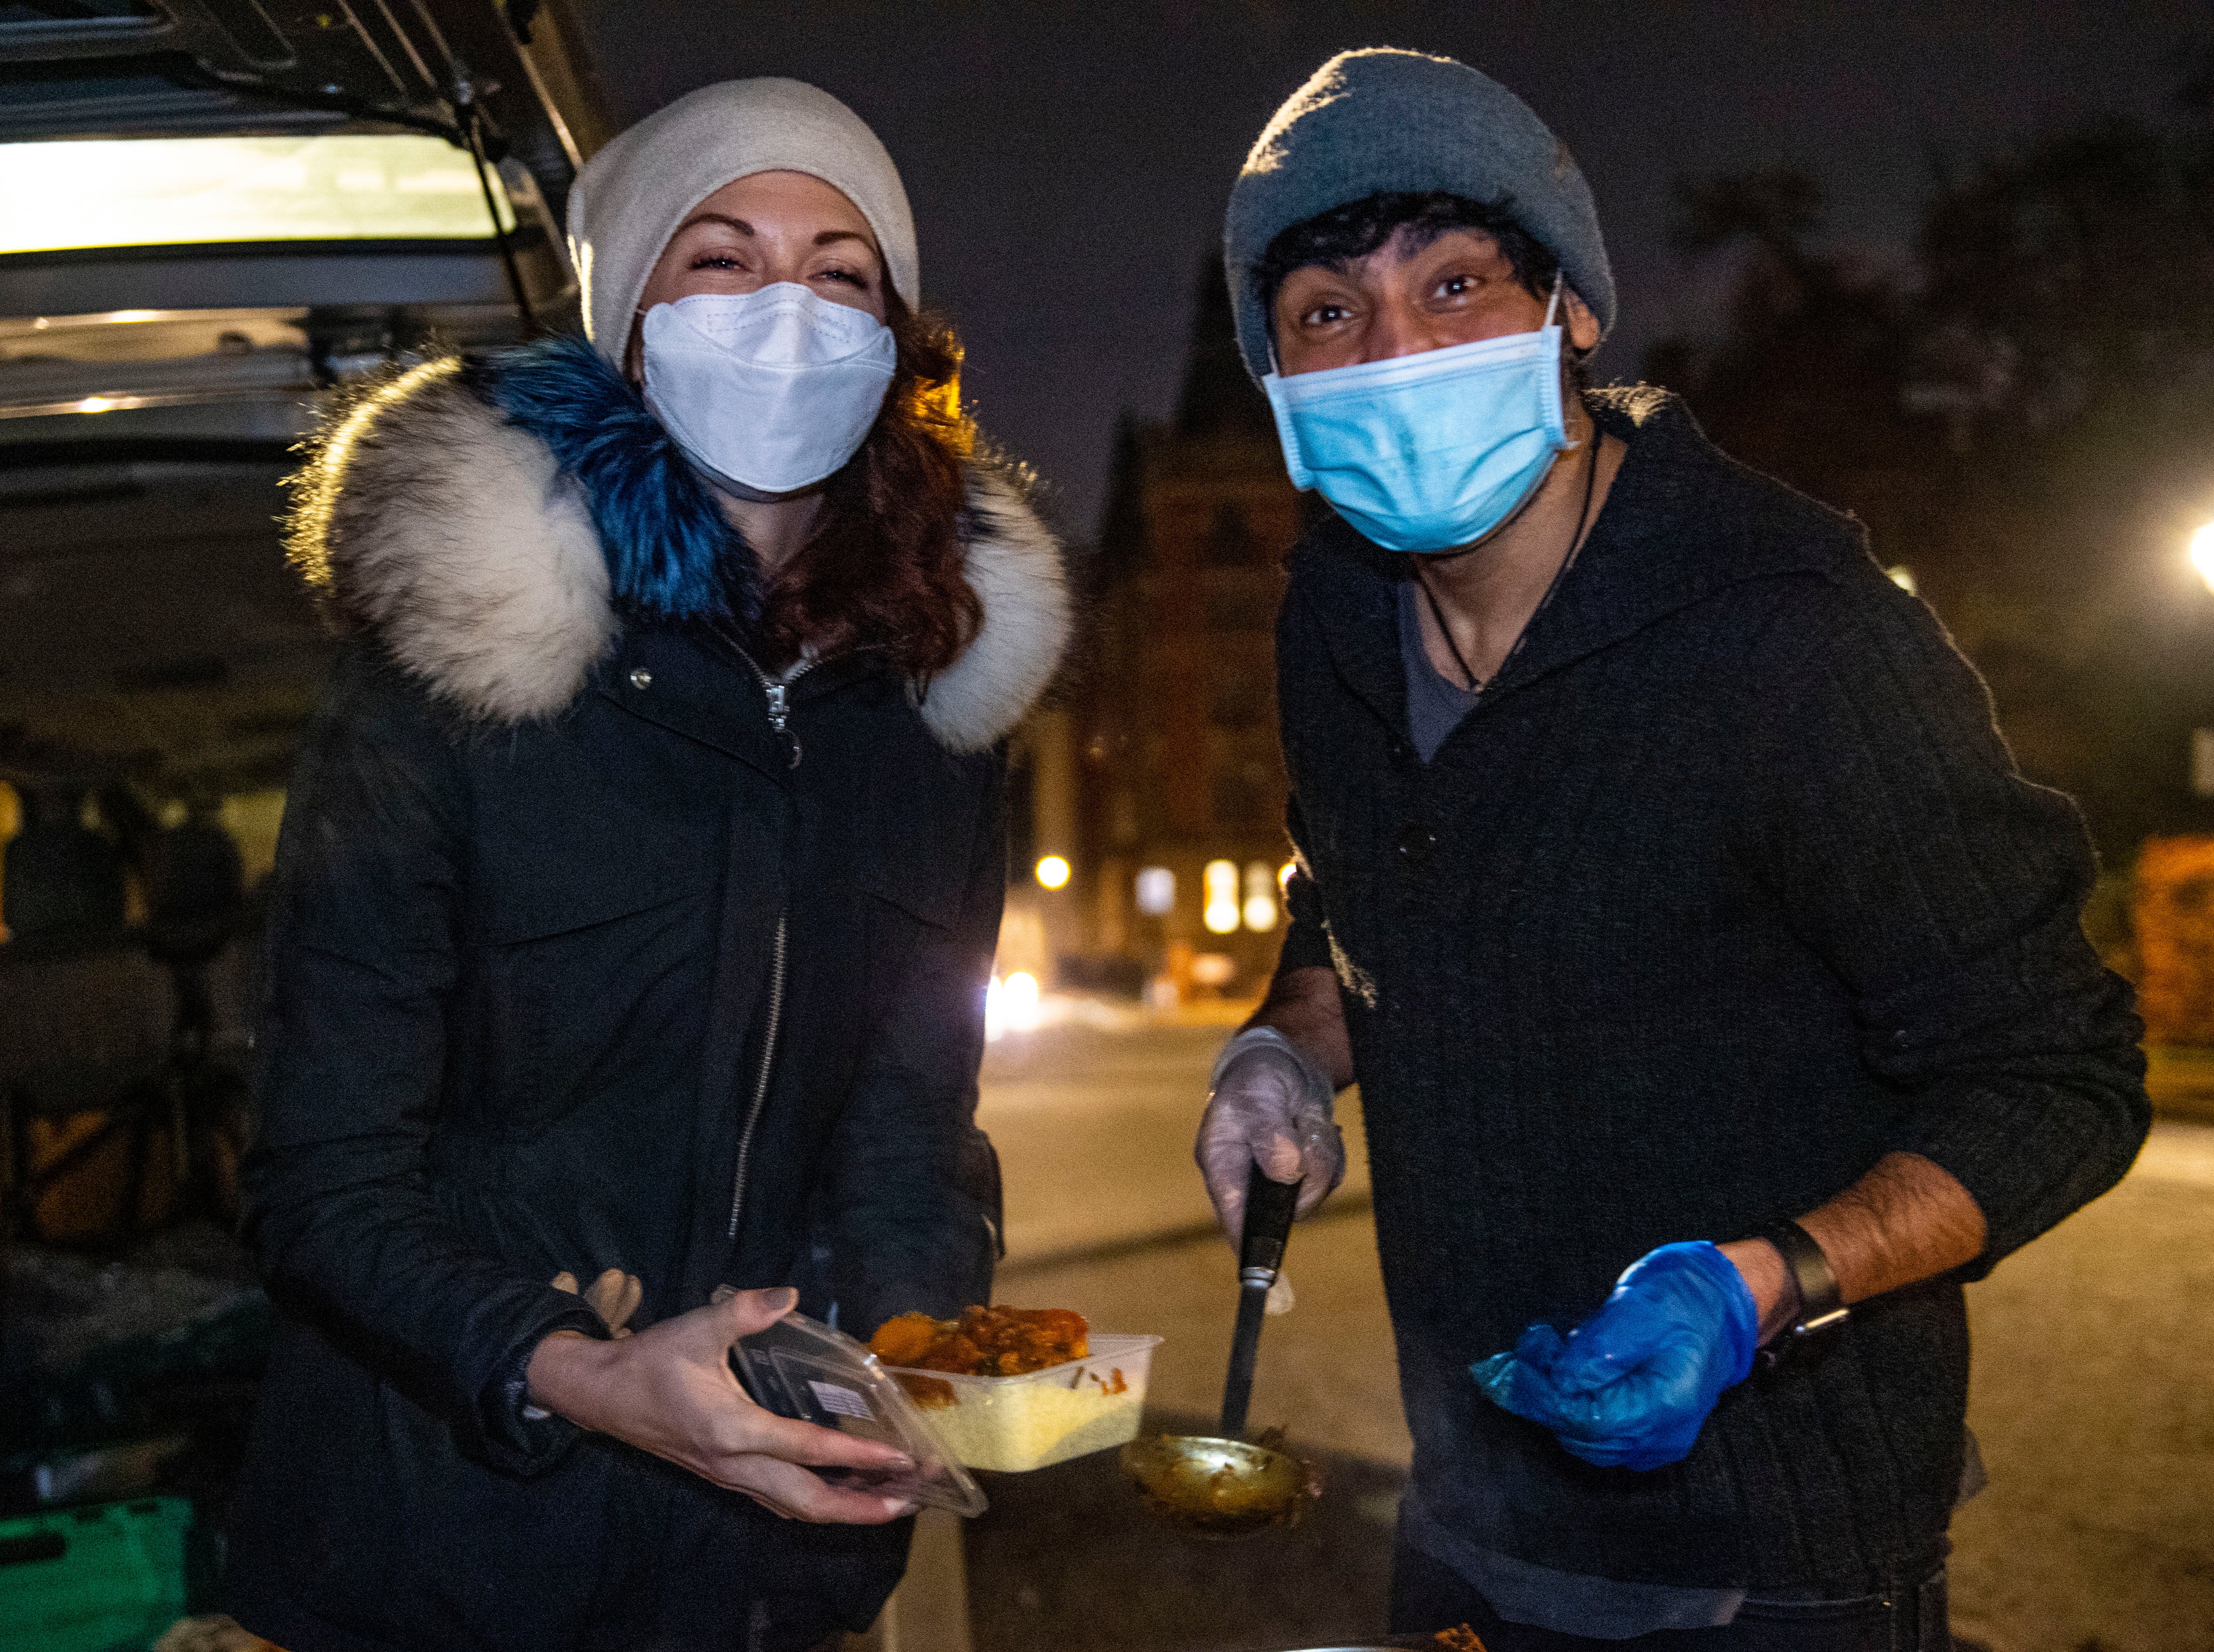 Volunteers from the Hare Krishna movement in Lincoln’s Inn Fields to help feed people in need during the 2020 coronavirus pandemic